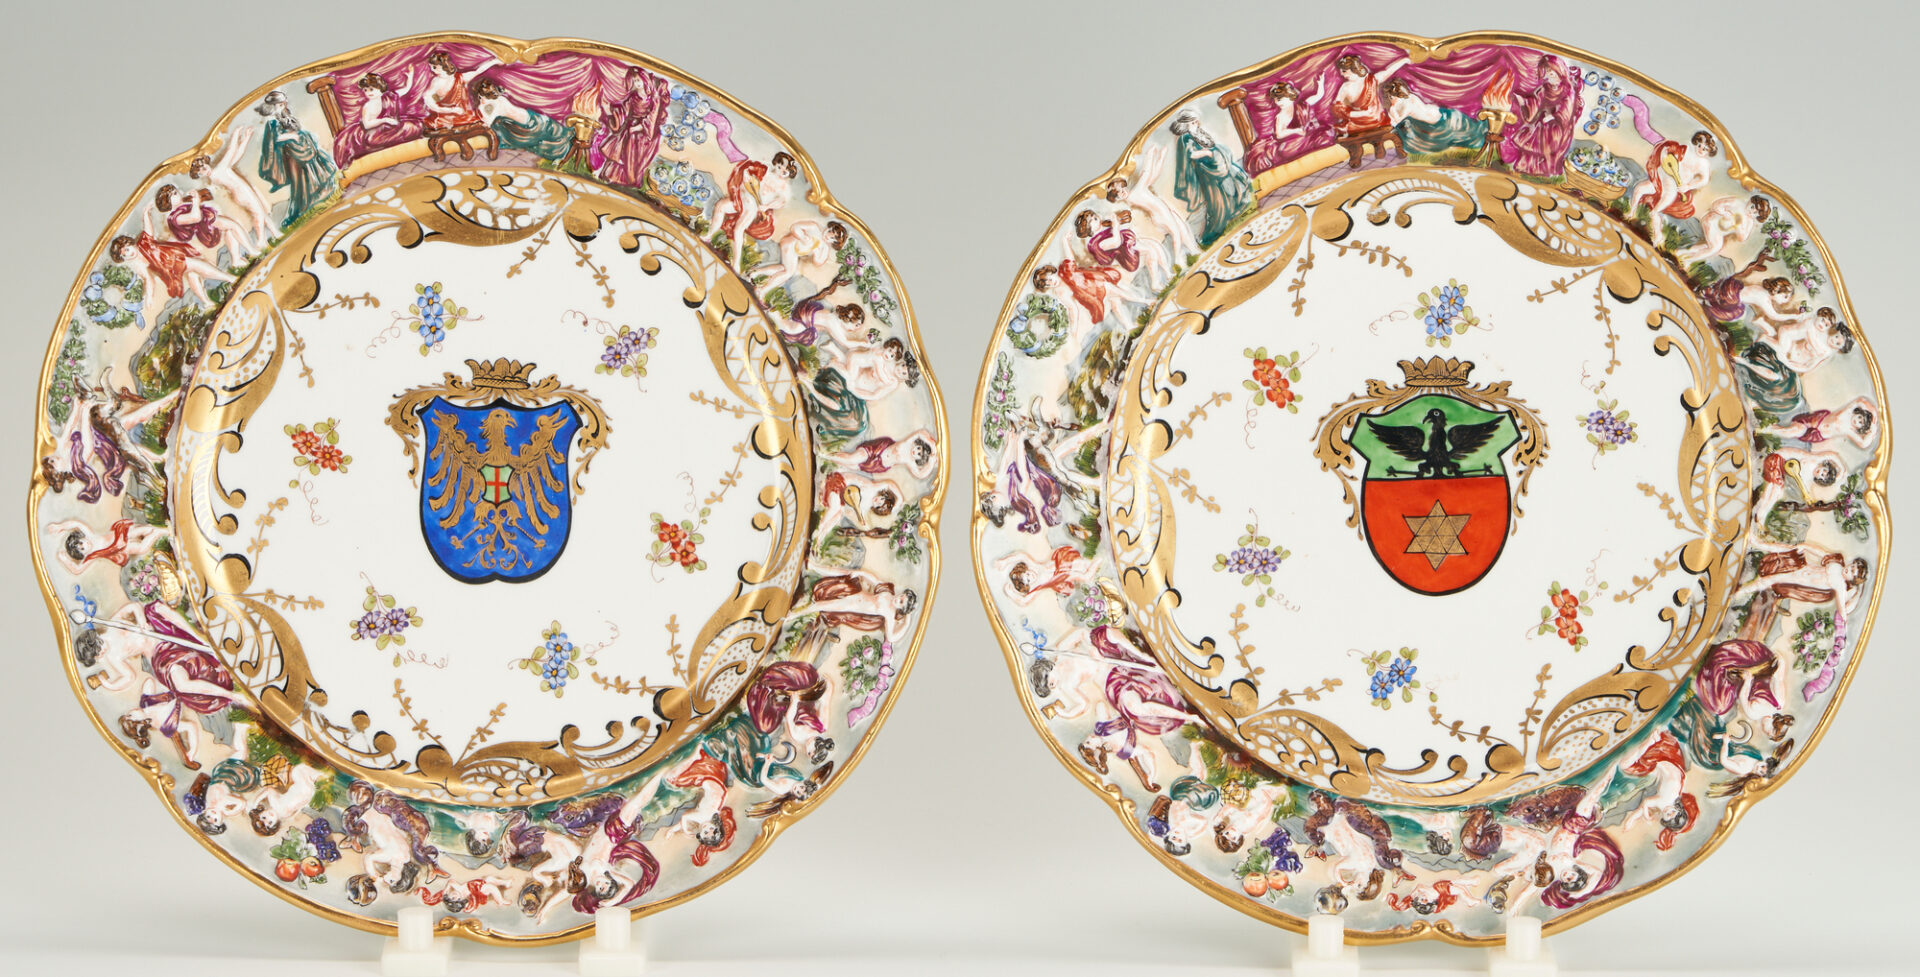 Lot 912: 17 Pcs. Capodimonte-Style Armorial Porcelain Dinner Plates or Chargers